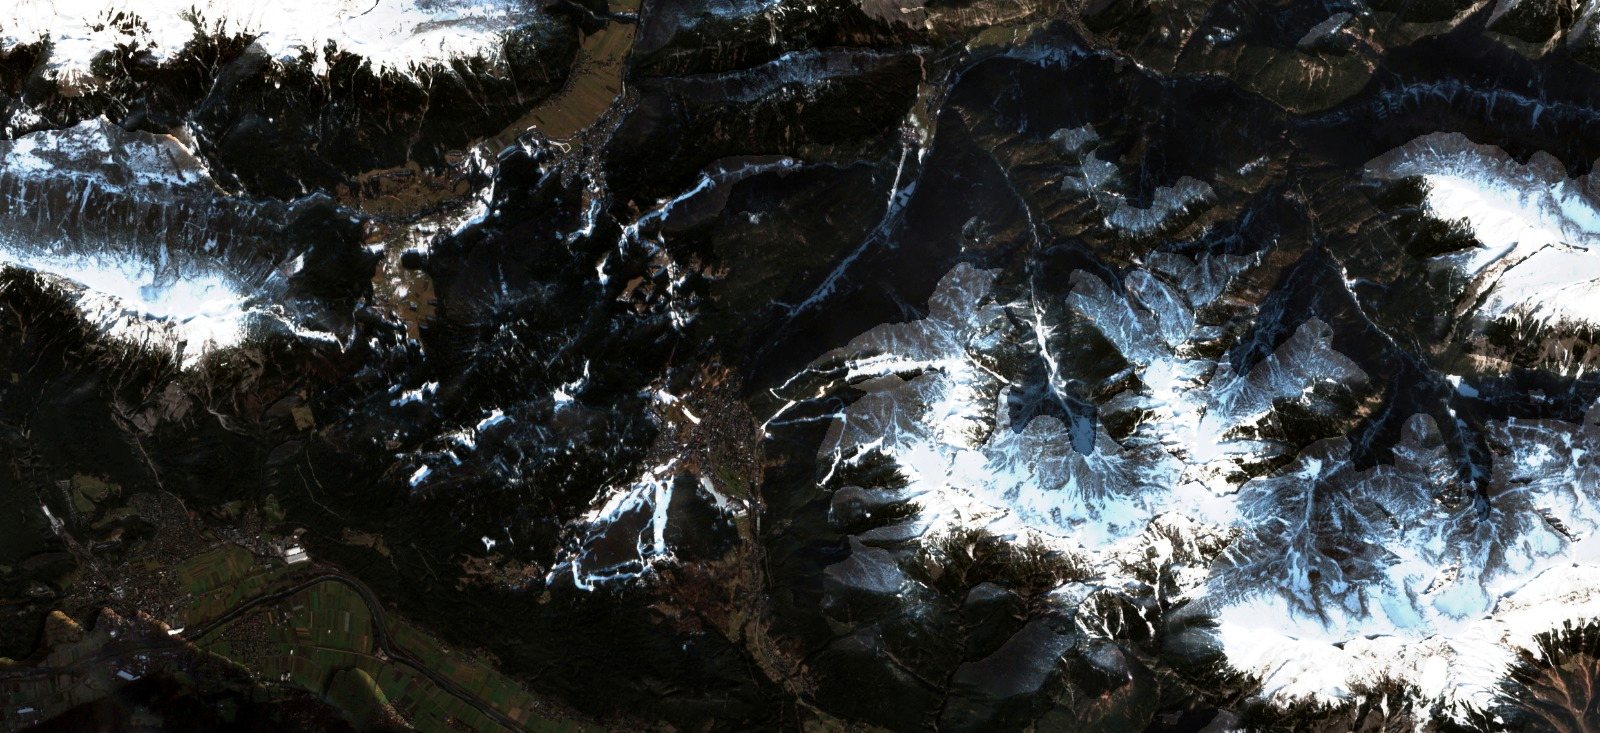 A satellite image shows lack of snow compared to other years, in Leutasch, Austria, January 1, 2023. European Union/ Copernicus Sentinel-2 L2A/Handout via REUTERS ATTENTION EDITORS - THIS IMAGE HAS BEEN SUPPLIED BY A THIRD PARTY. MANDATORY CREDIT.